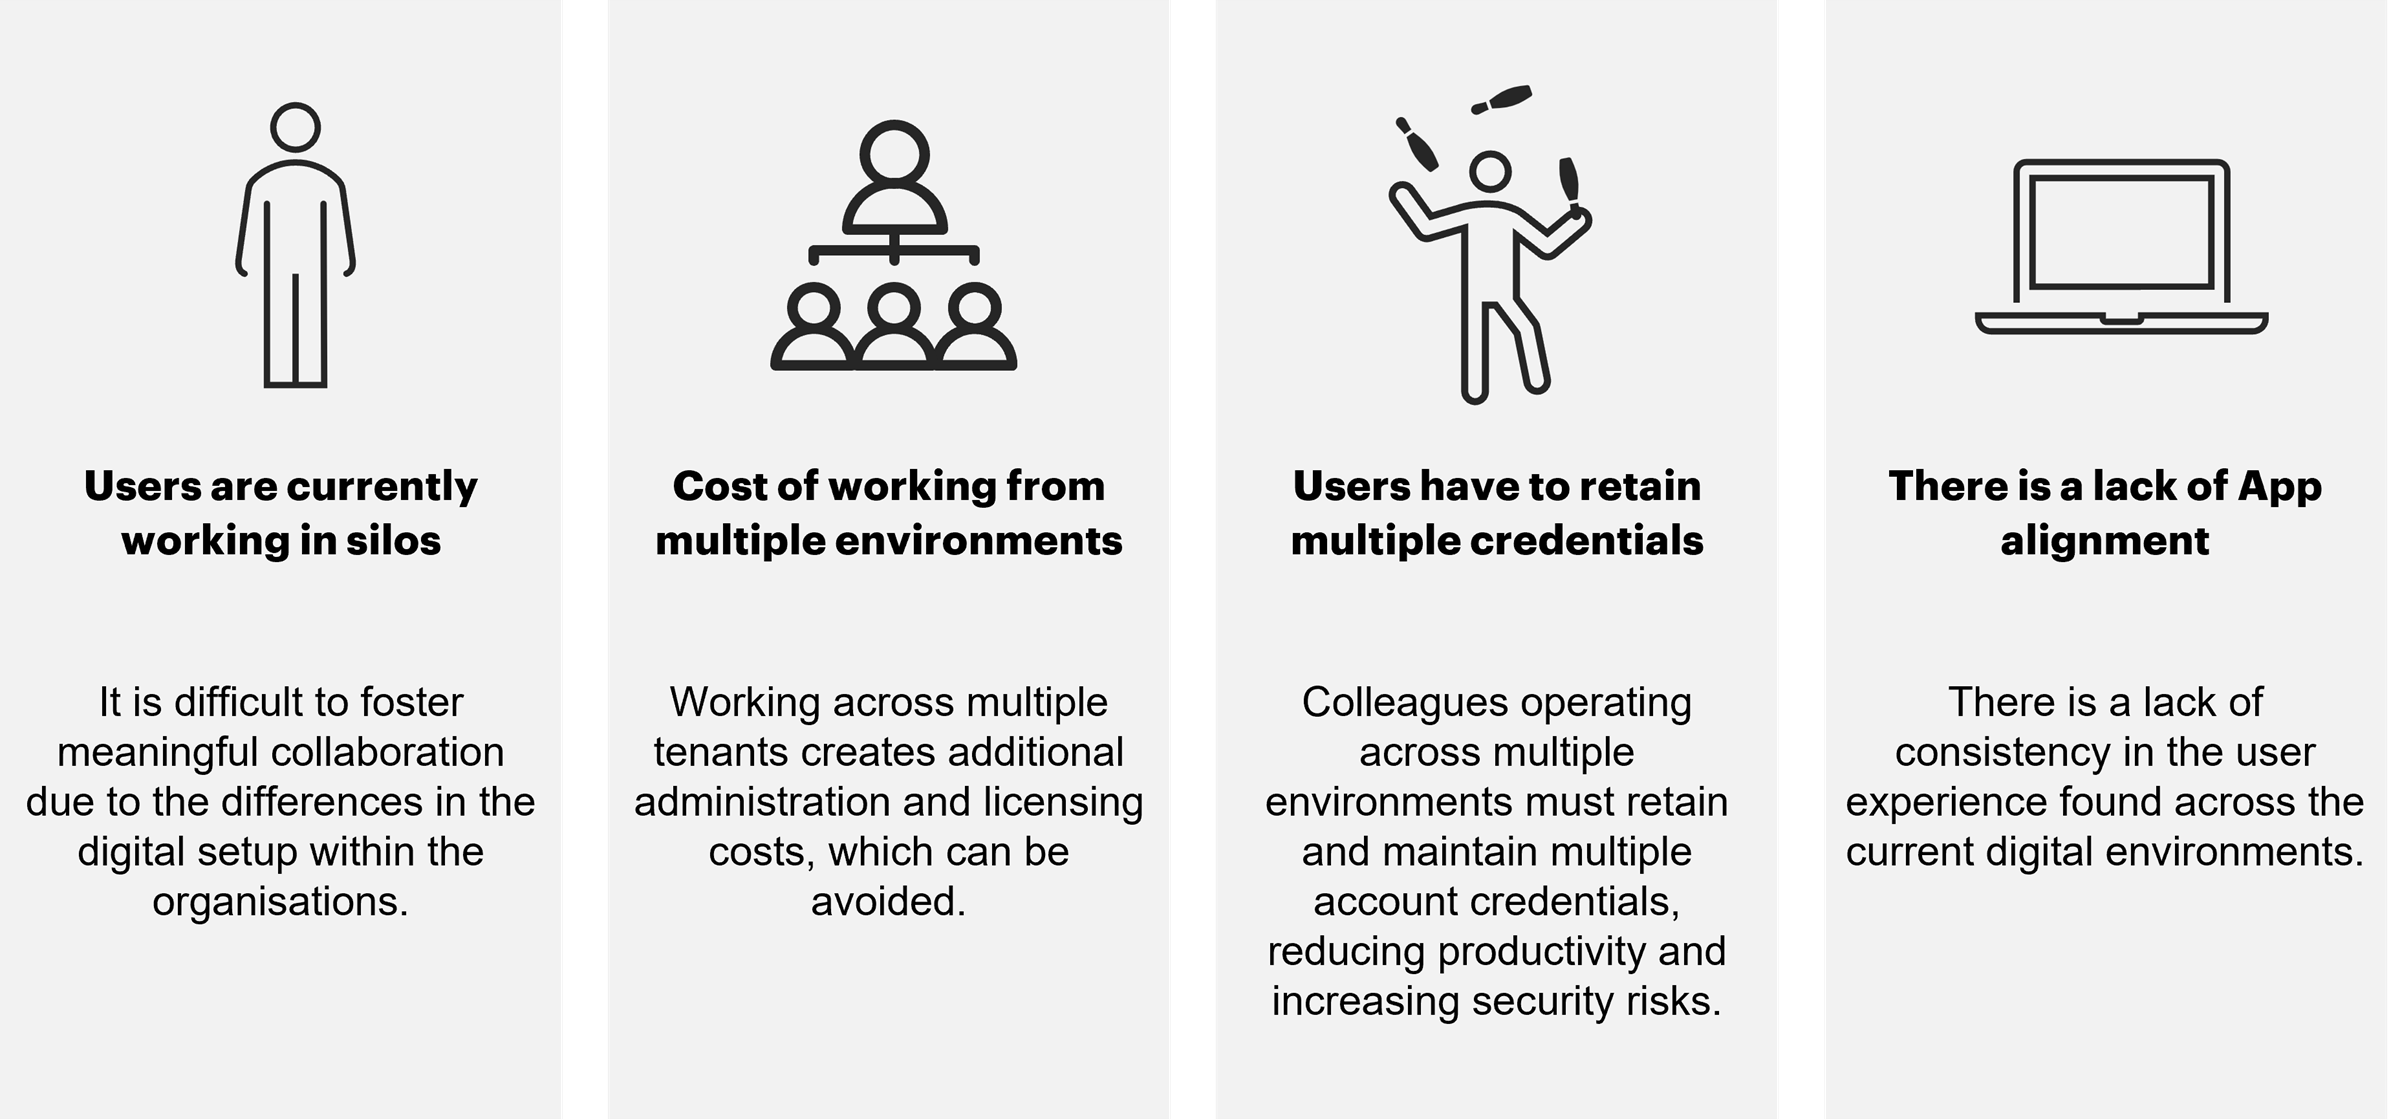 Graphic showing why change is needed. The reasons include: 
- Users are currently working in silos
- Cost of working from multiple environments
- Users have to retain multiple credentials
- There is a lack of app alignment